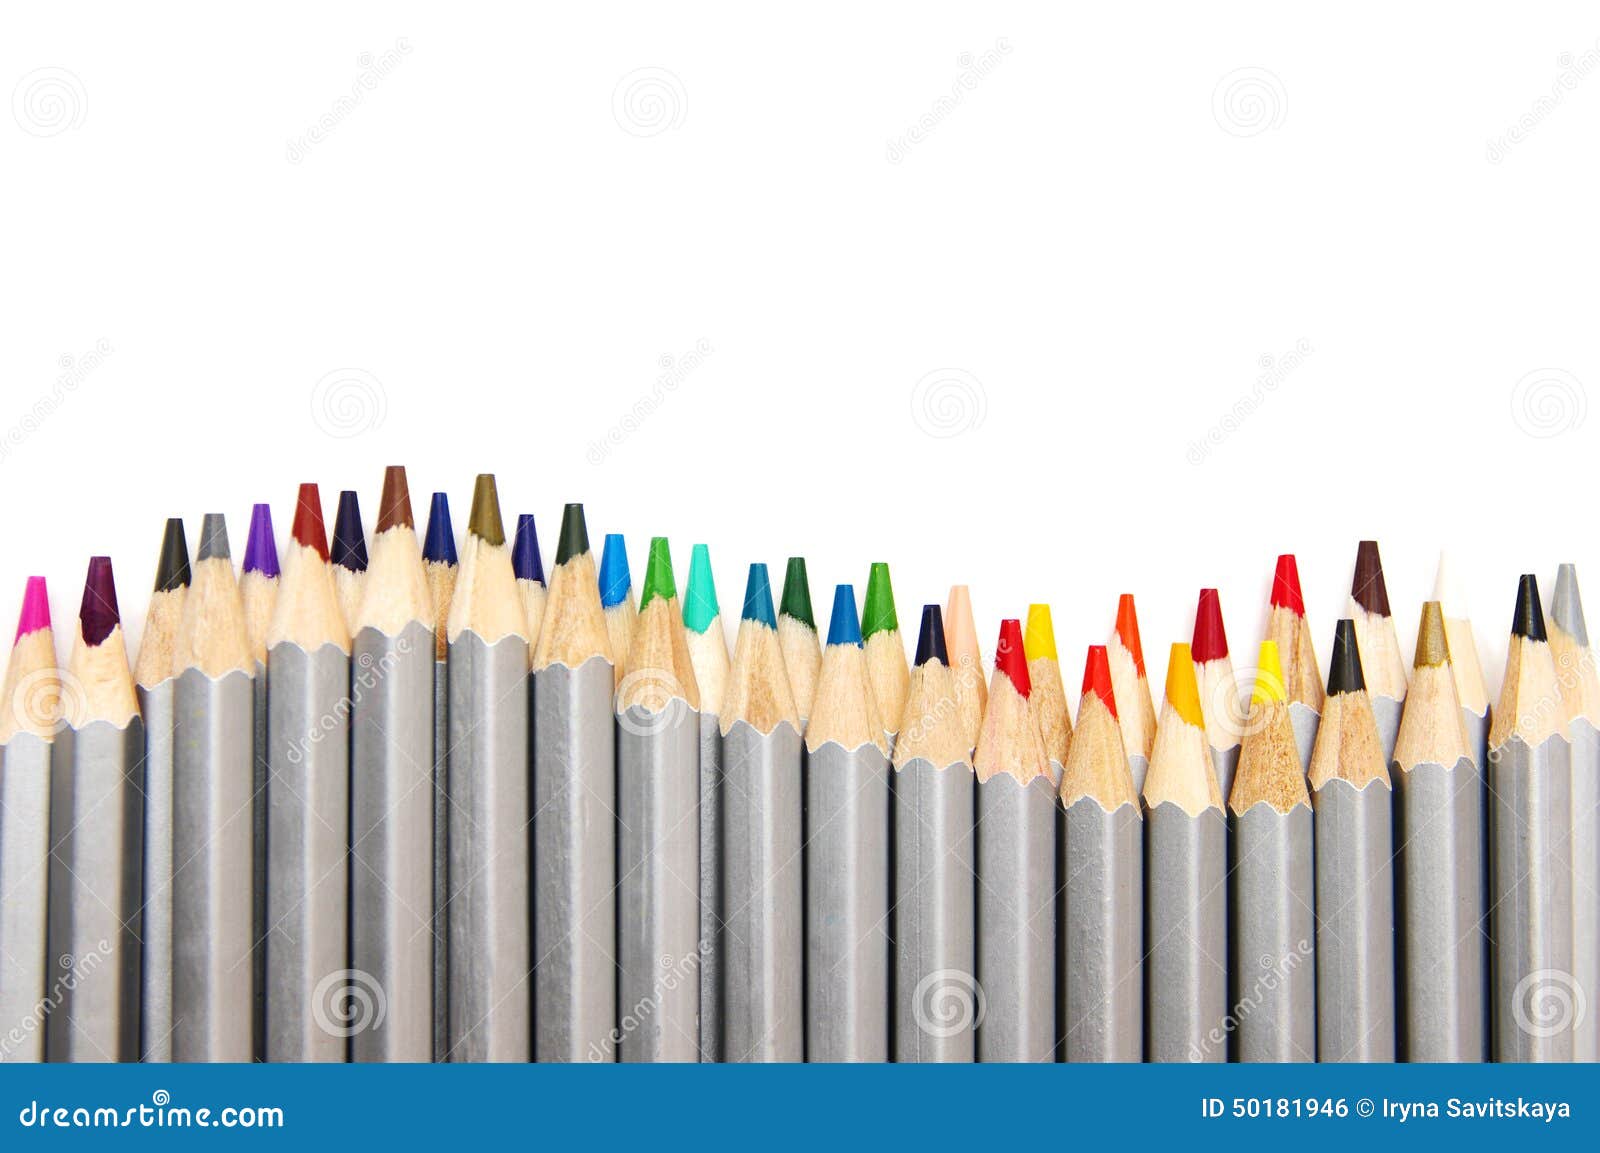 https://thumbs.dreamstime.com/z/colored-pencils-drawing-isolated-white-background-50181946.jpg